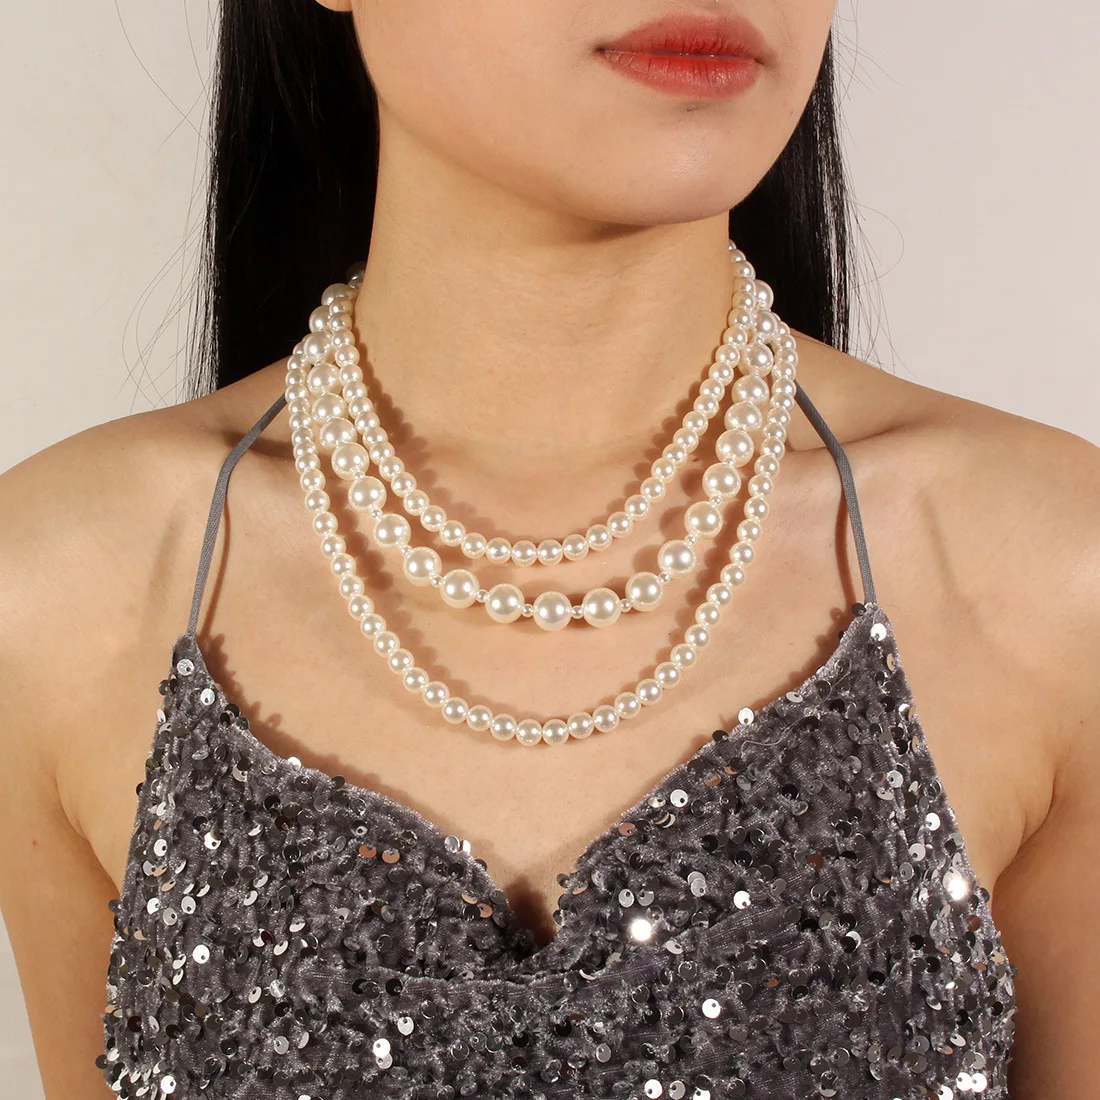 

Trend Multilayer Pearl Pendant Choker Necklace For Women Short Clavicle Chain Elegant Necklace Wed Dinner Party Bridal Jewelry